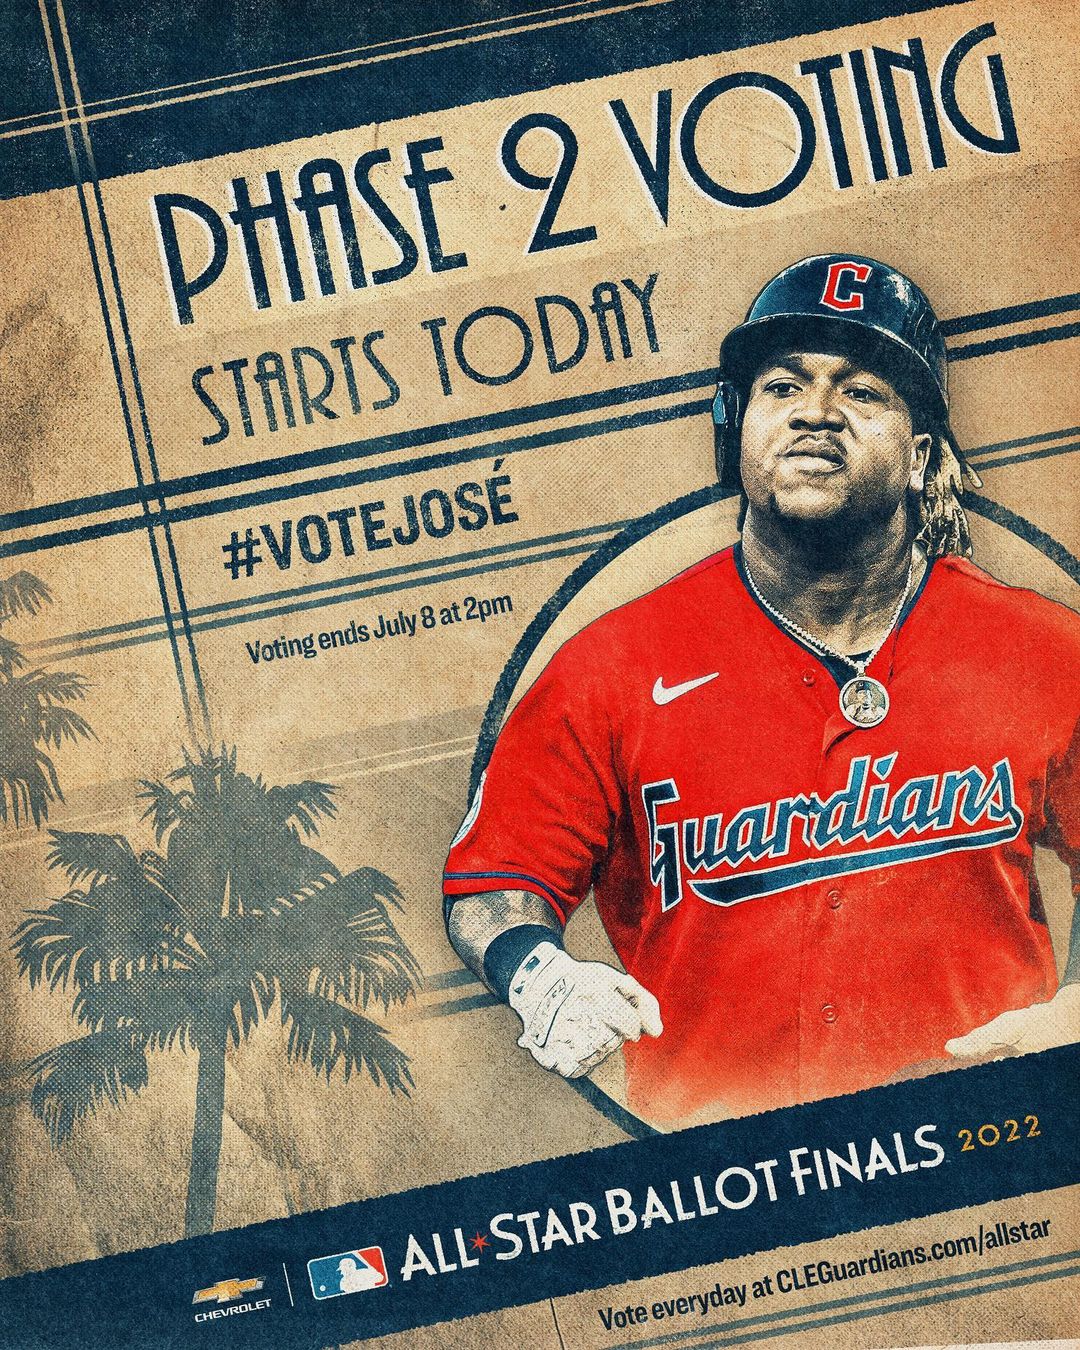 Get your votes in to make sure José is on the starting lineup in LA!  #VoteJosé...